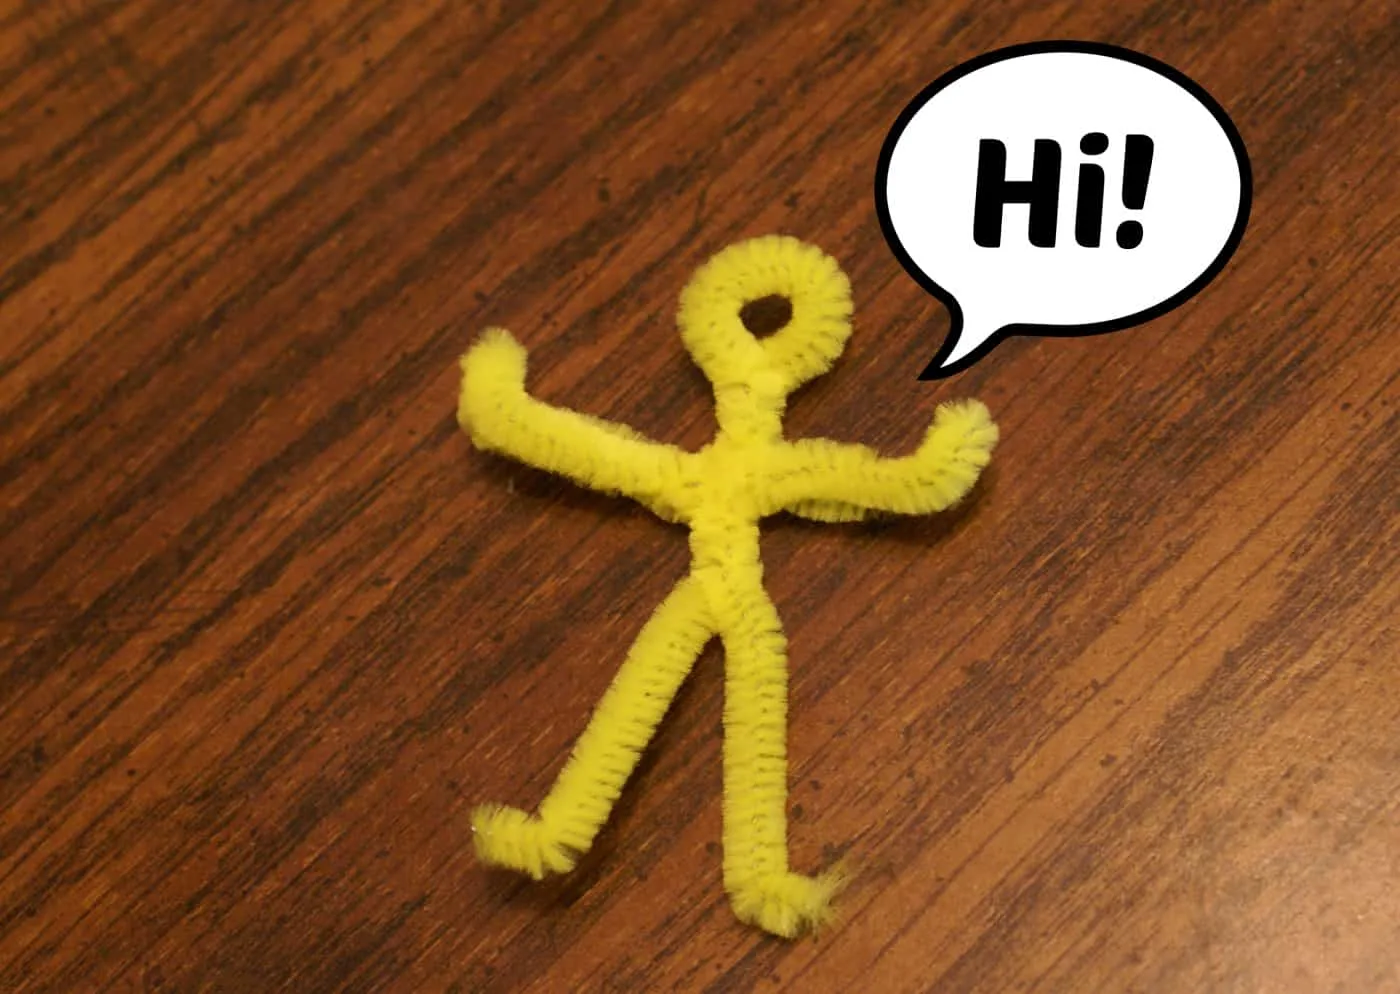 parachute guy made from yellow fuzzy stick